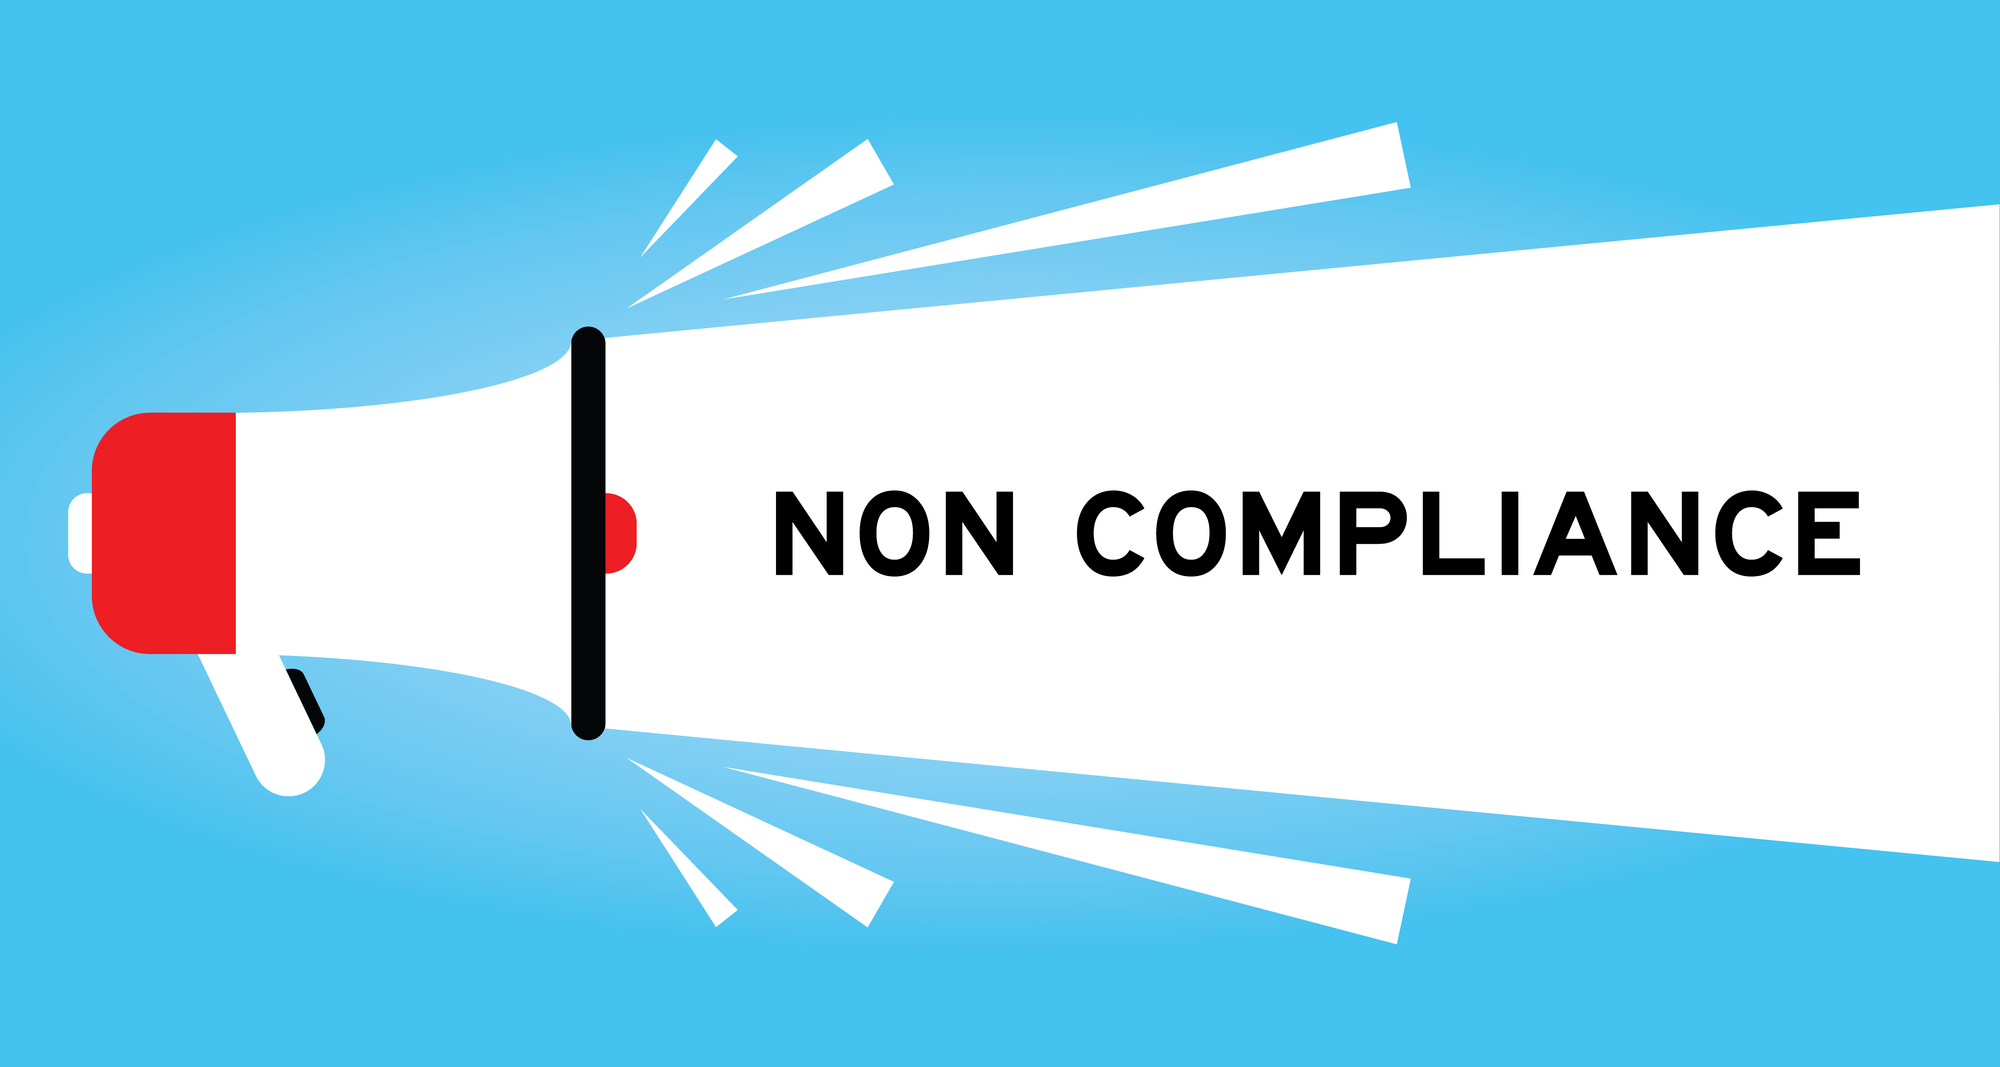 Illustration of a megaphone projecting the words "non compliance" related to PCI on a blue background.